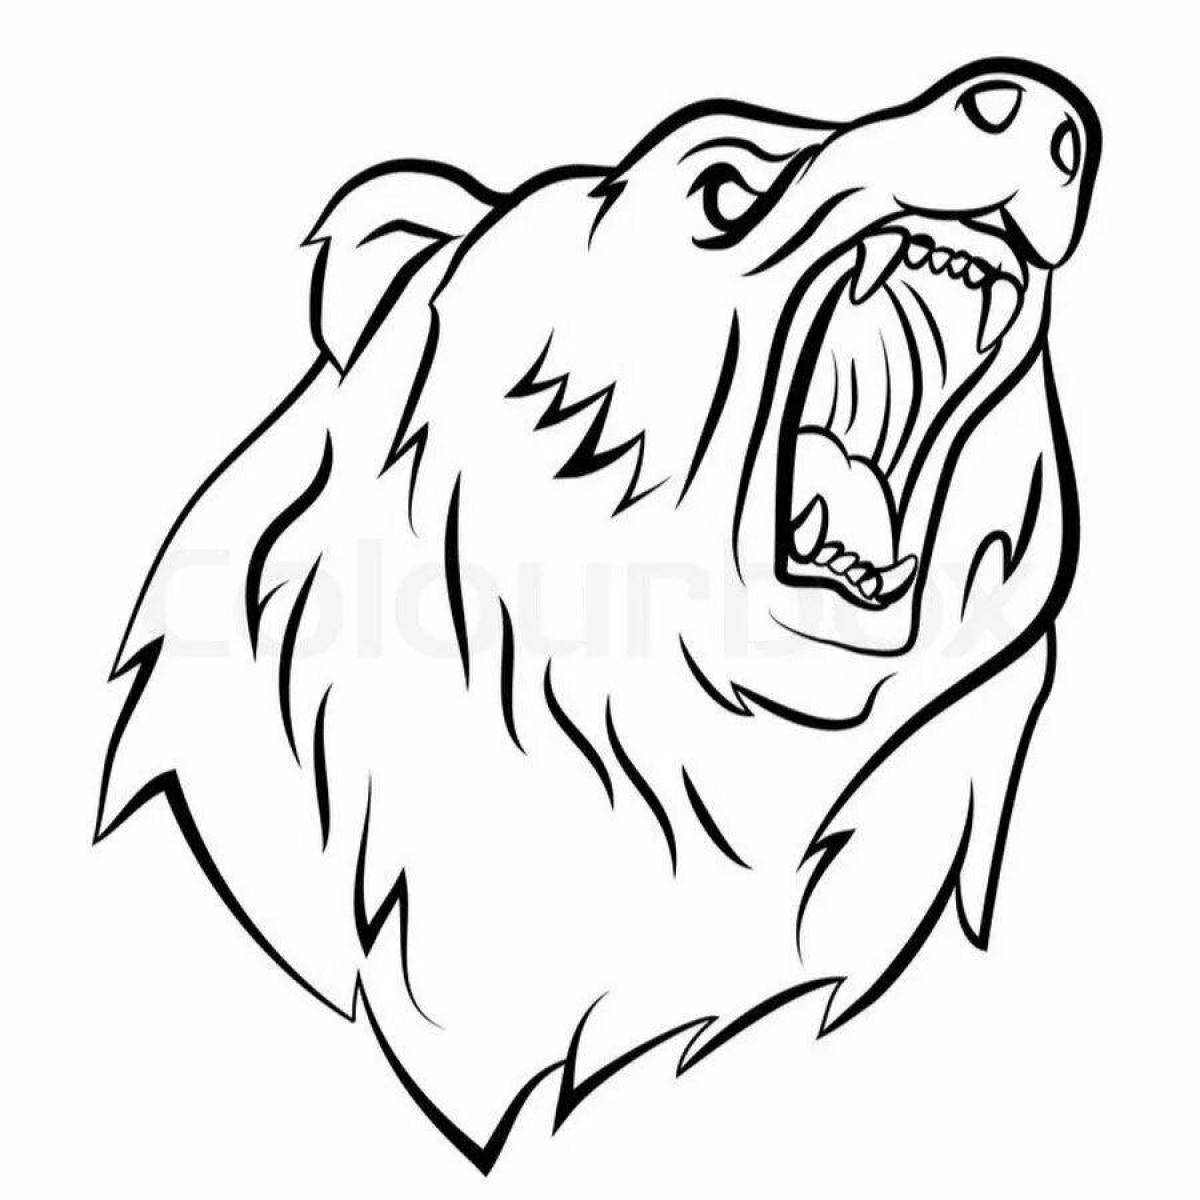 Crazy angry bear coloring page